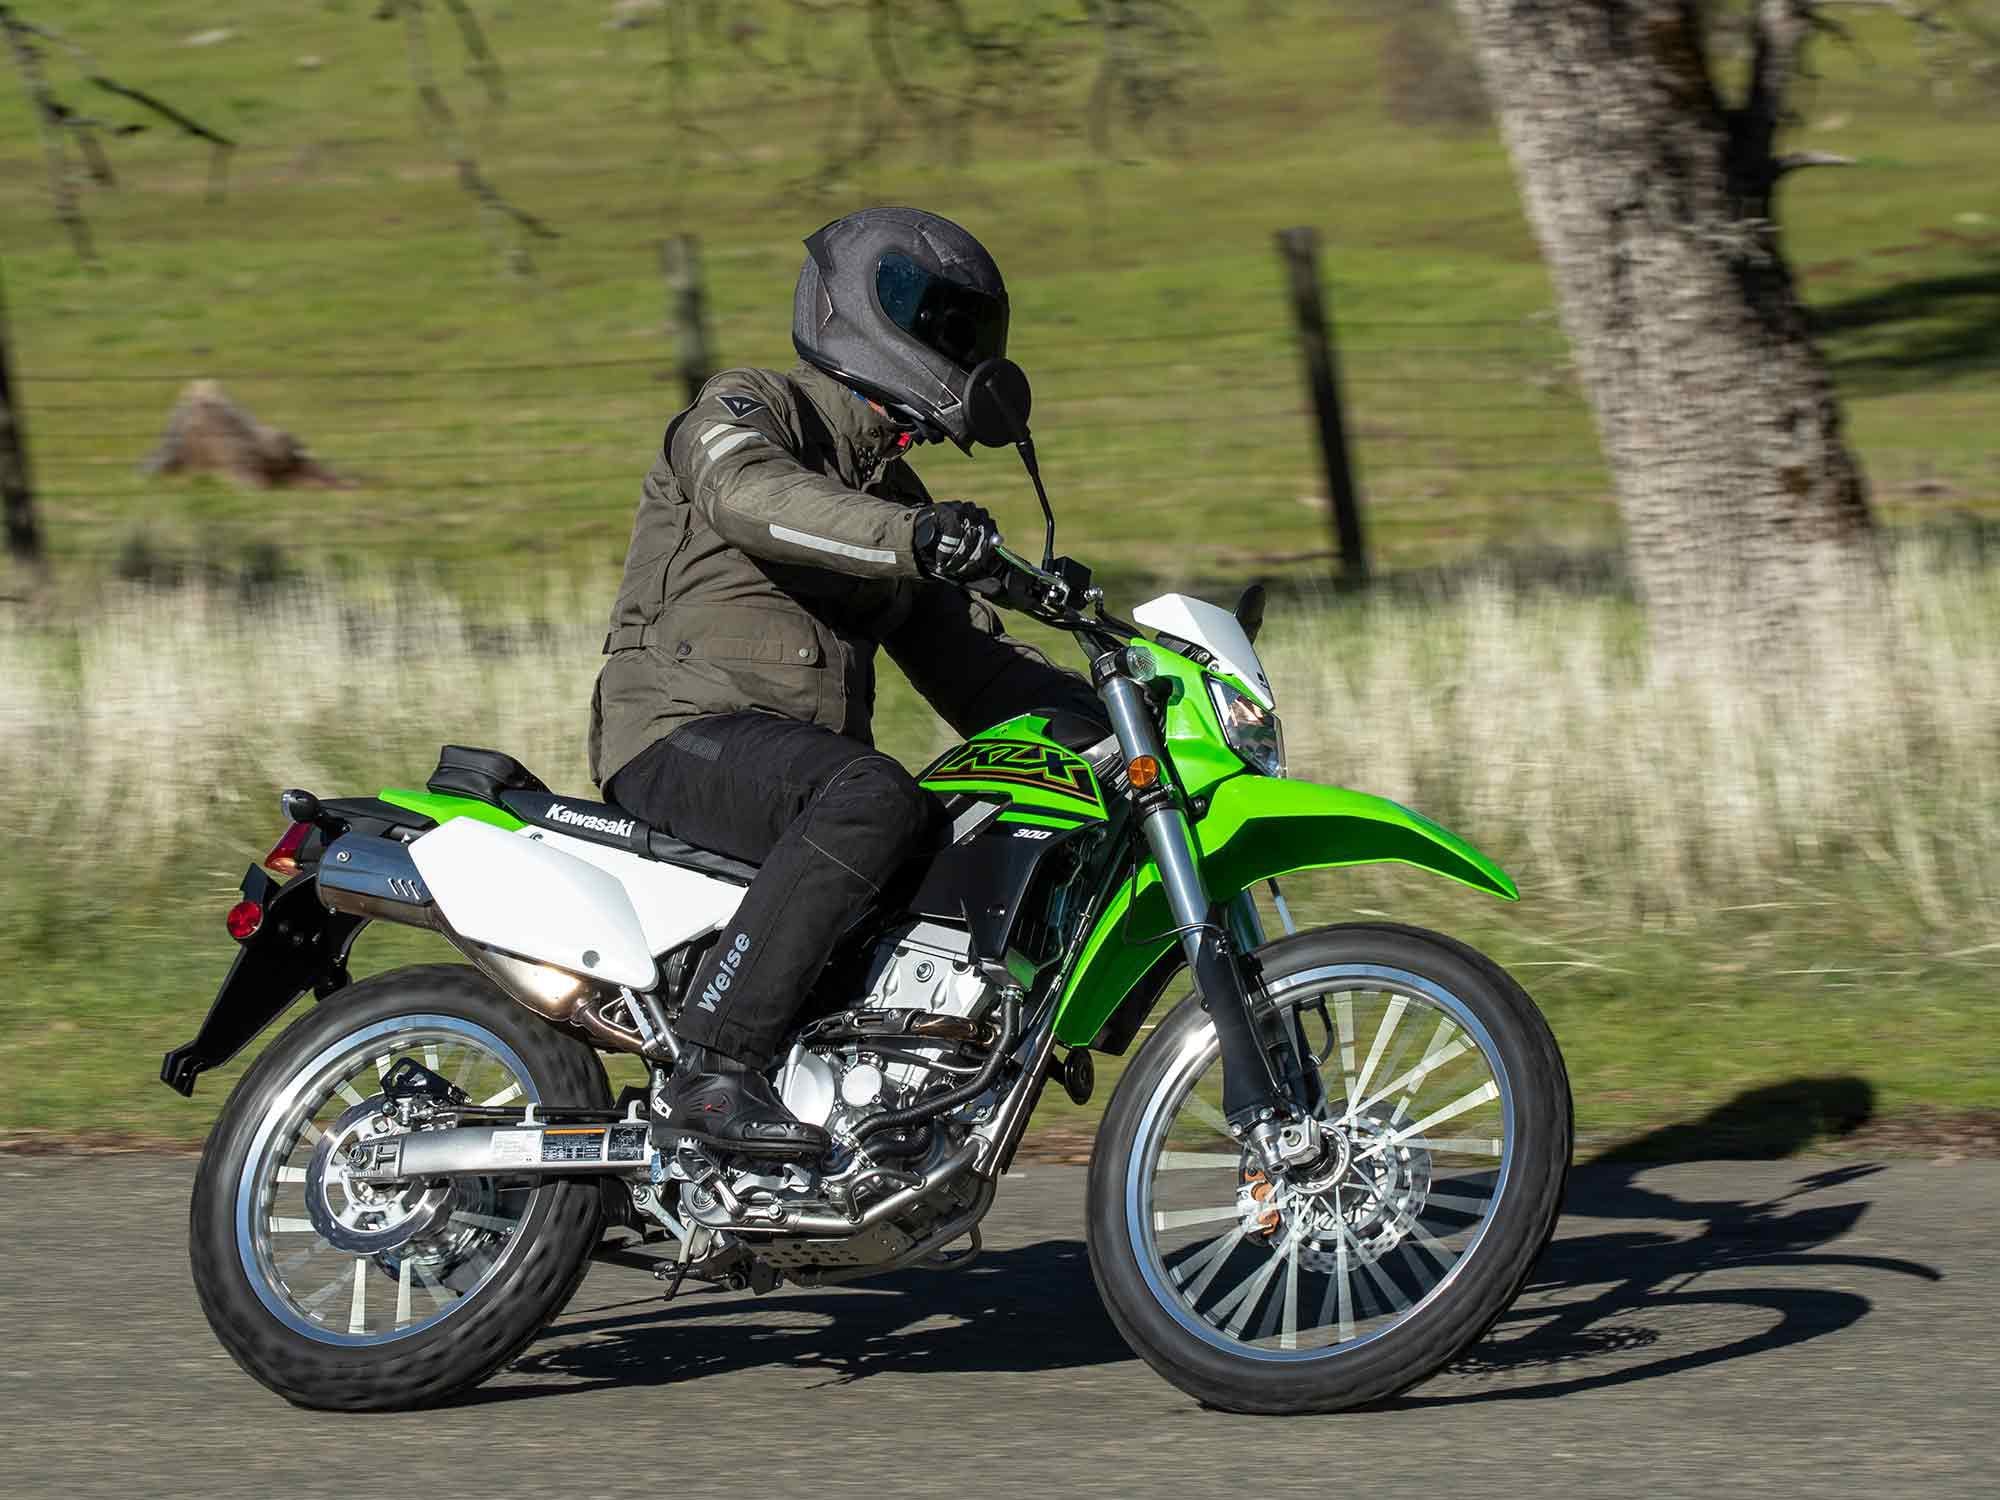 The KLX300′s cockpit is spacious and comfortable, and engine vibrations are well controlled via a gear-driven counterbalancer.